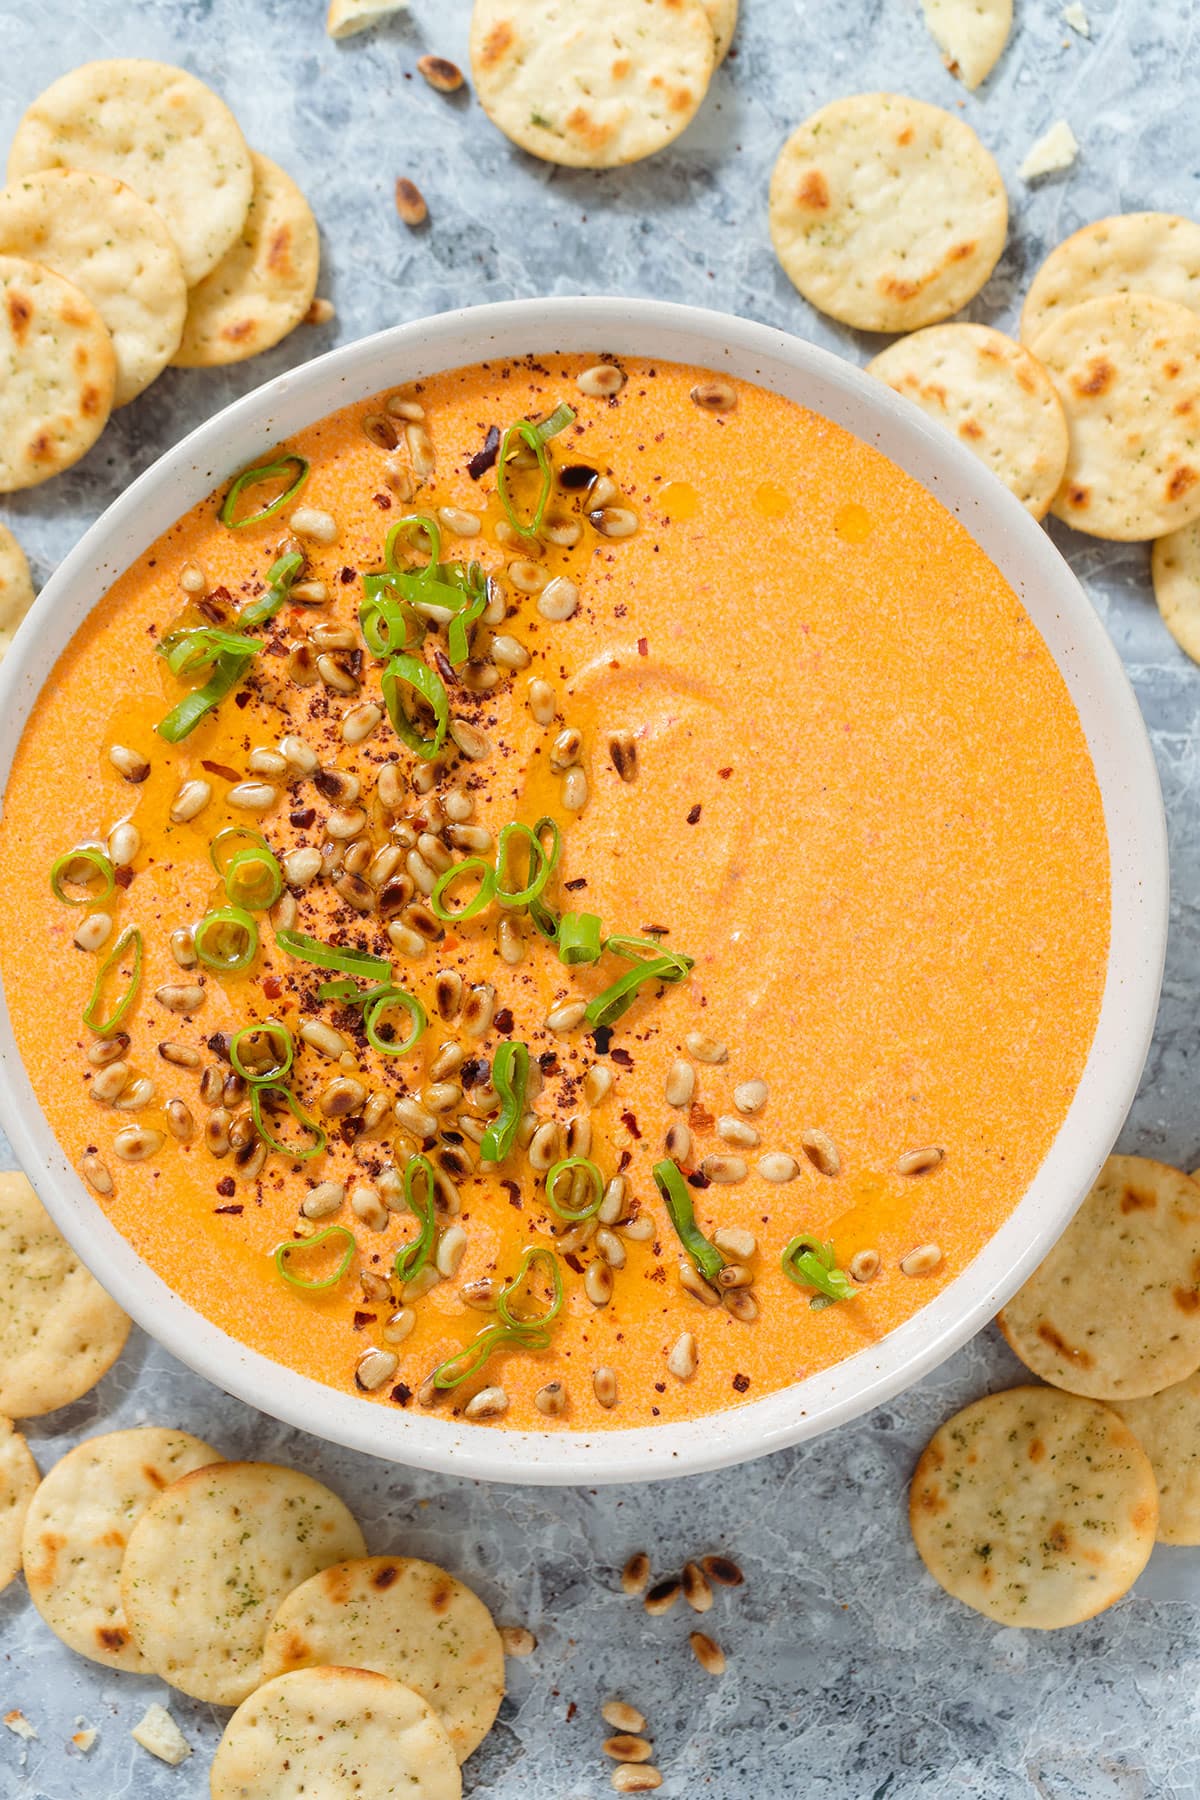 Bright orange dip in a beige bowl garnished with toasted pine nuts, spring onion, and ground sumac, with round crackers around the bowl.